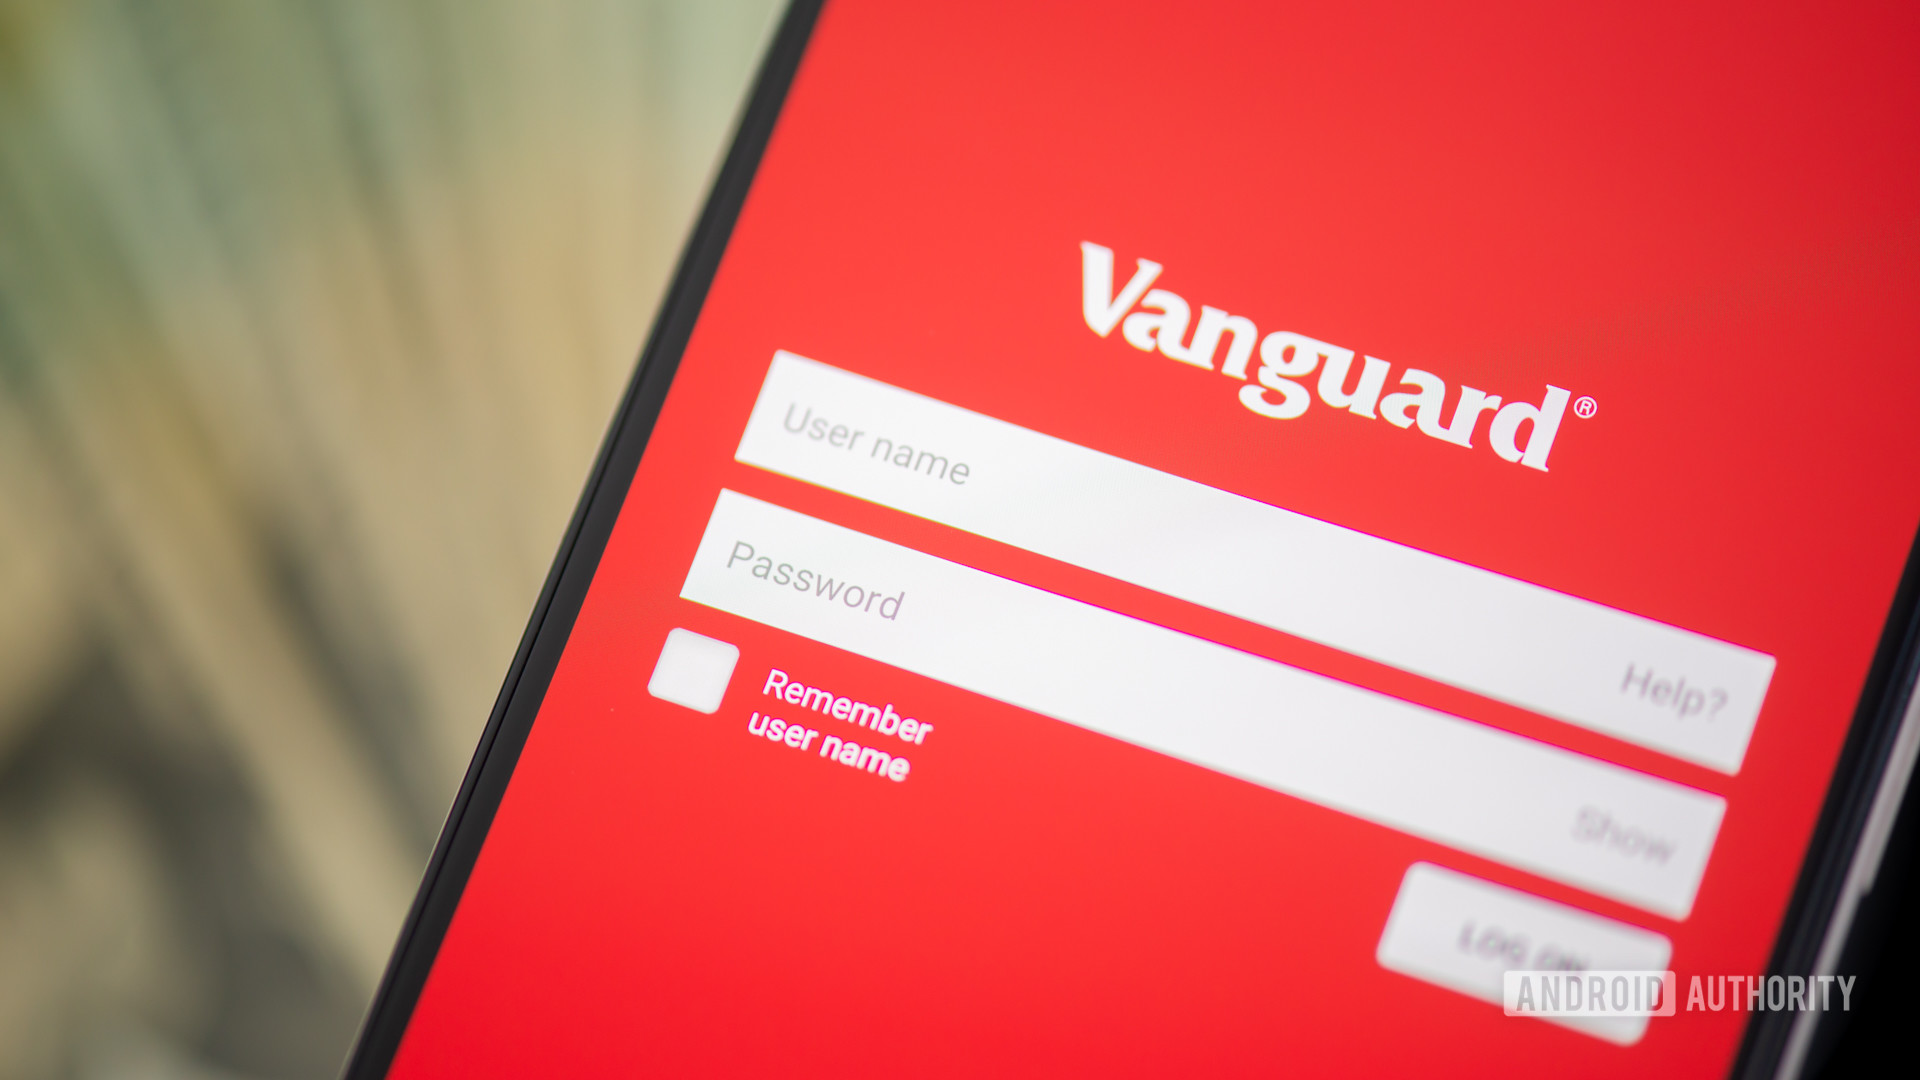 Vanguard app for investing for beginners on smartphone 